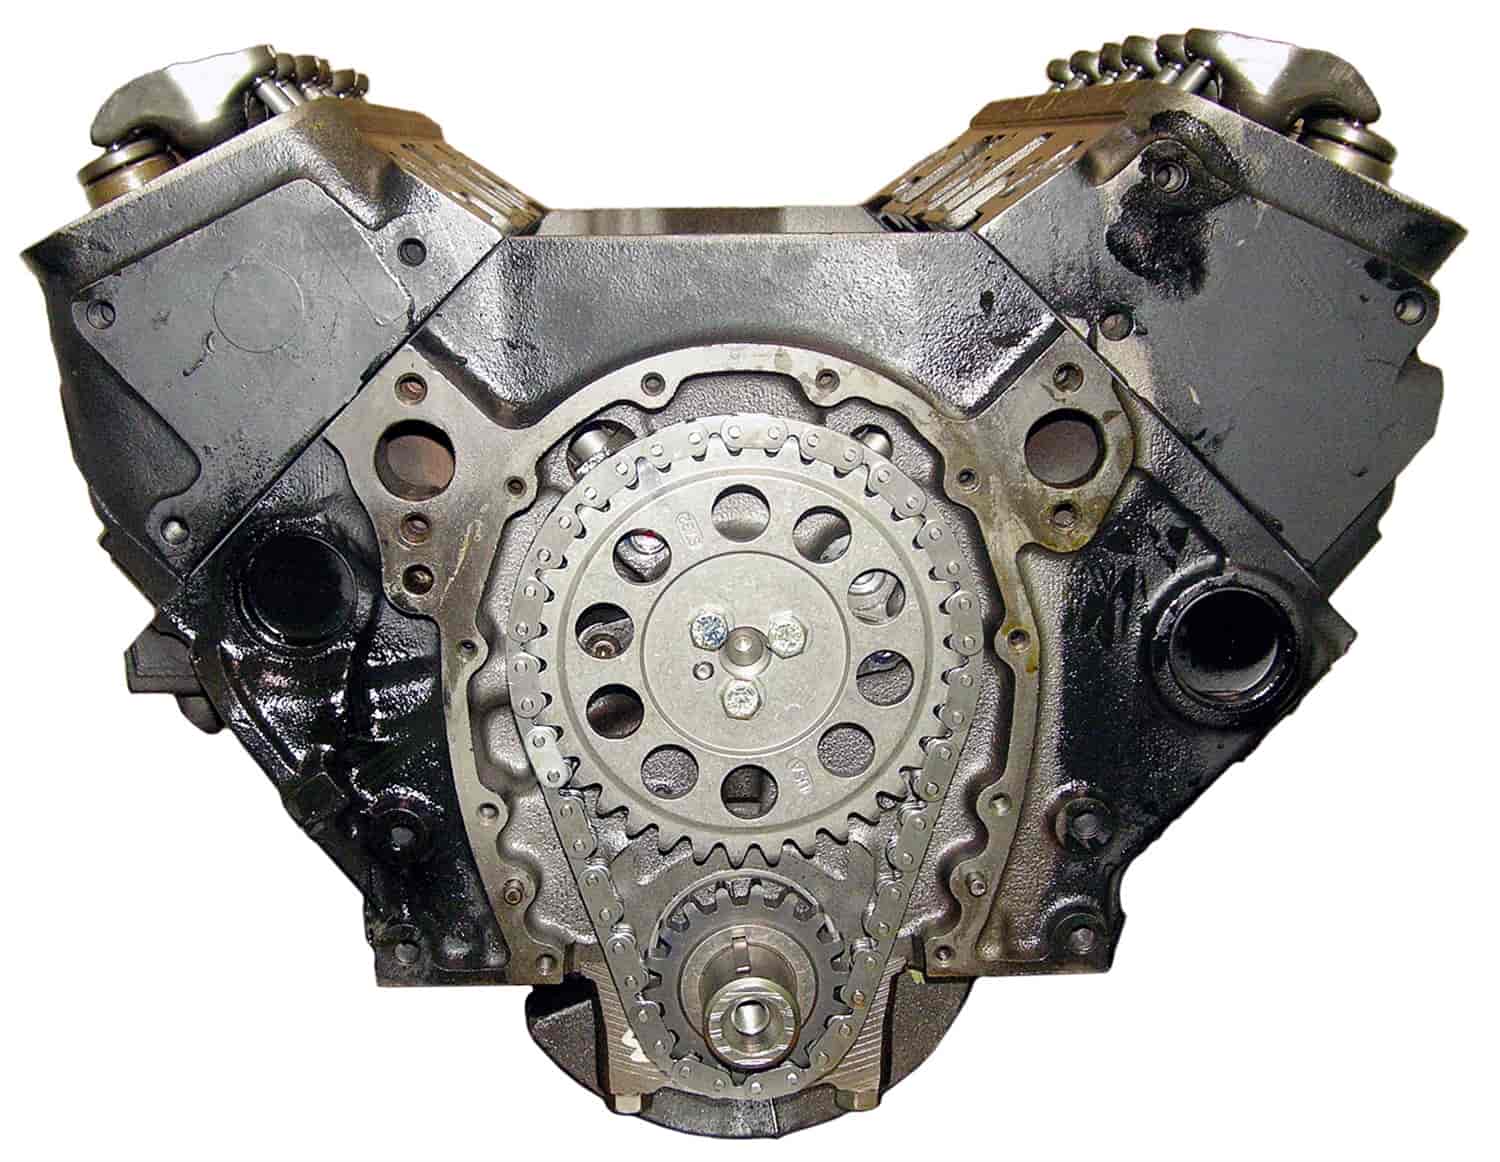 Remanufactured Crate Engine for 1992 Chevy/GMC Truck &